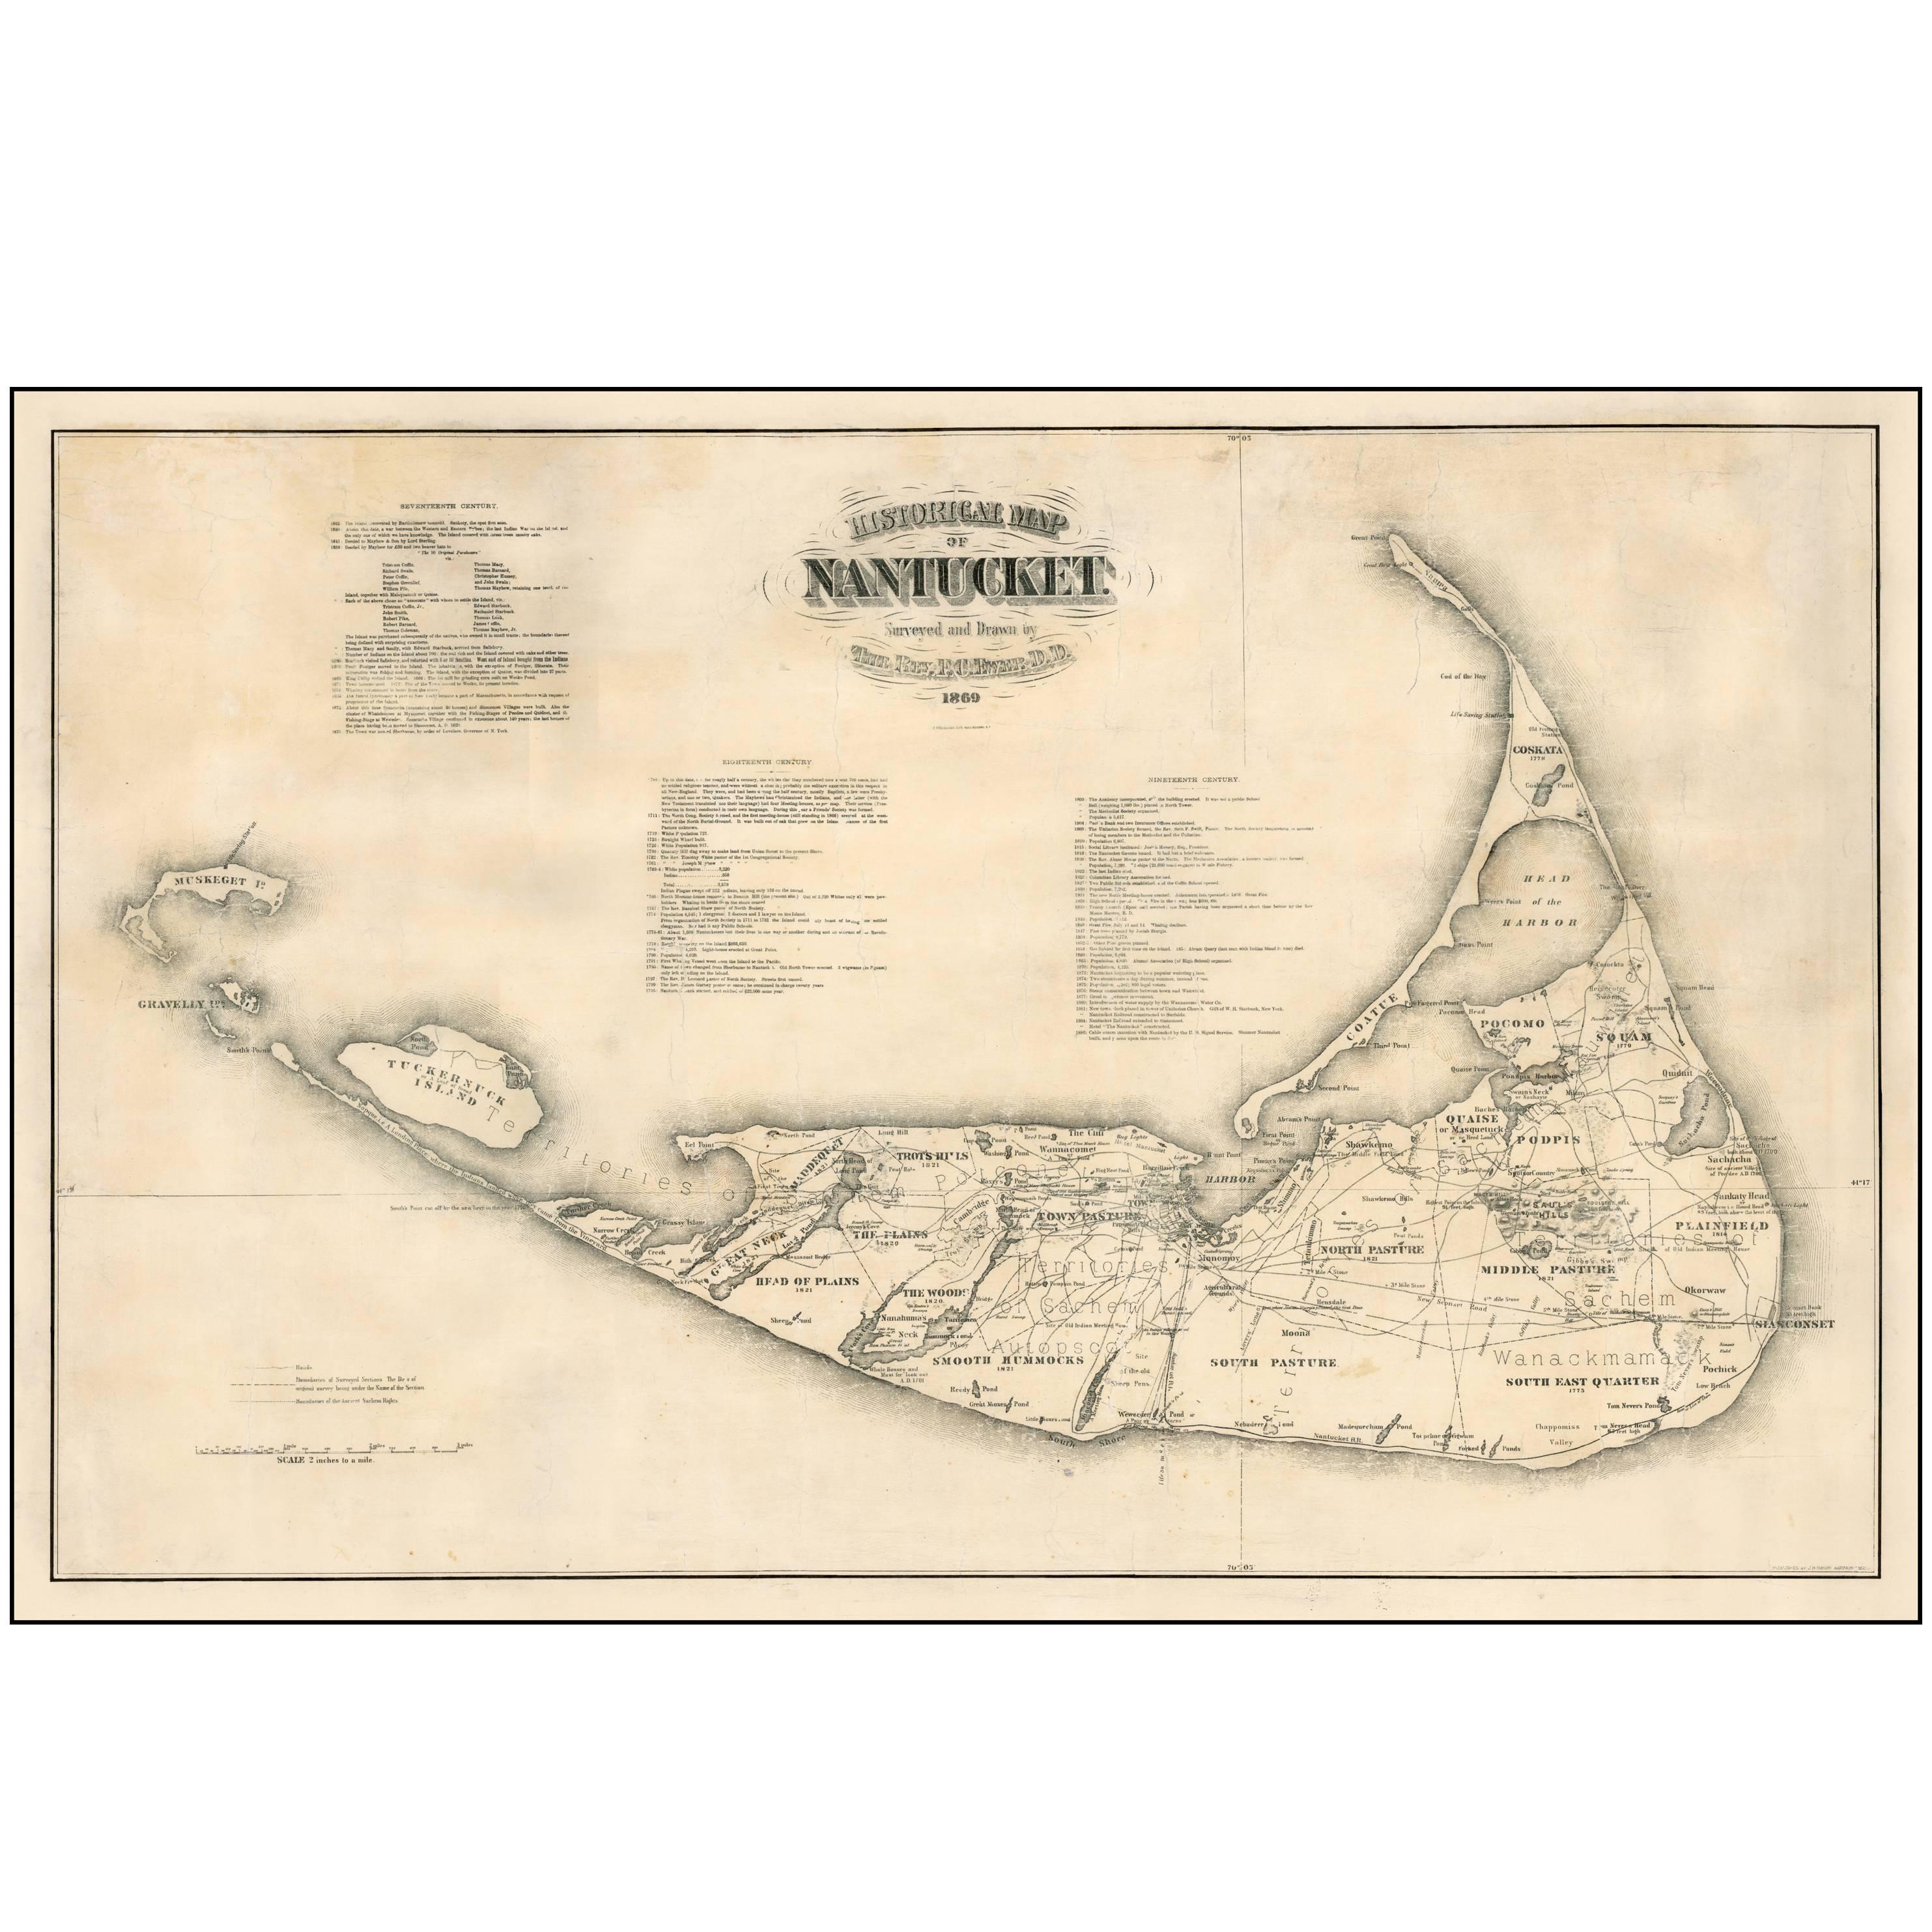 Original Antique 1869 Wall Map of Nantucket For Sale